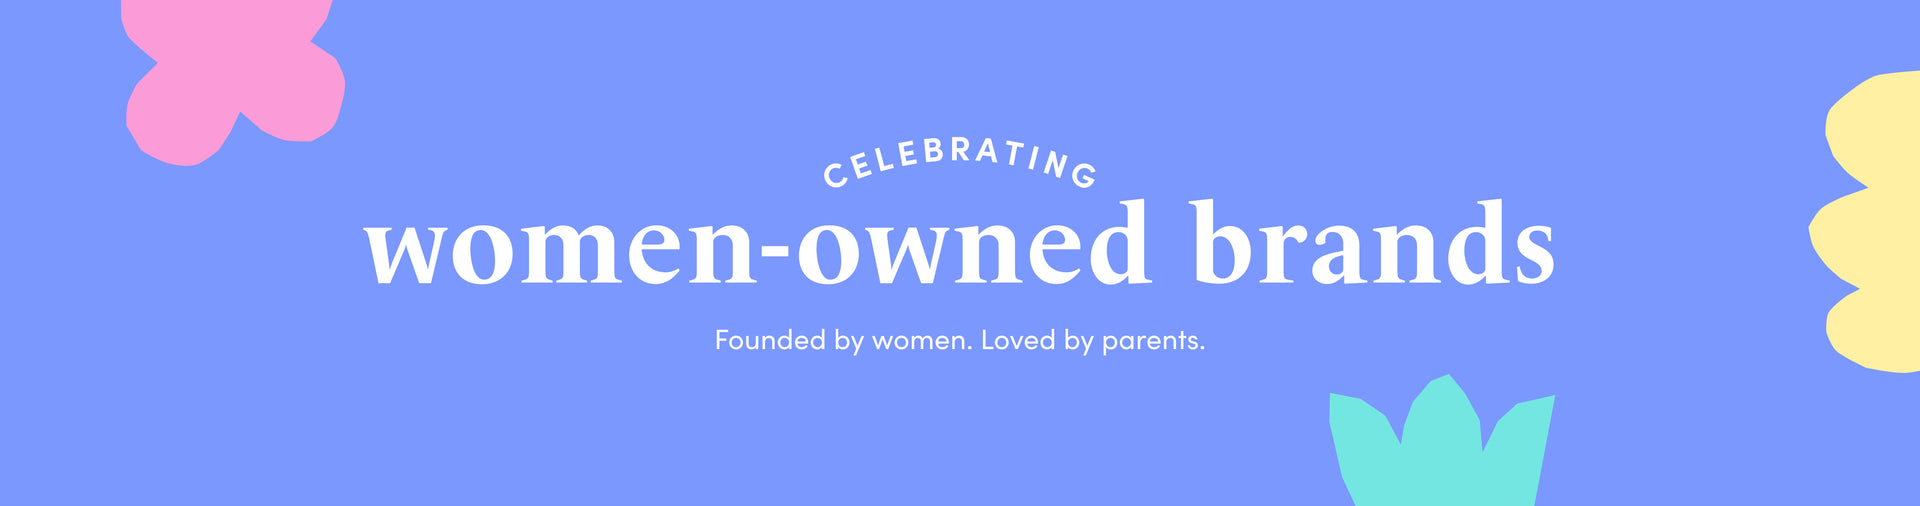 CELEBRATING women-owned brands Founded by women. Loved by parents.